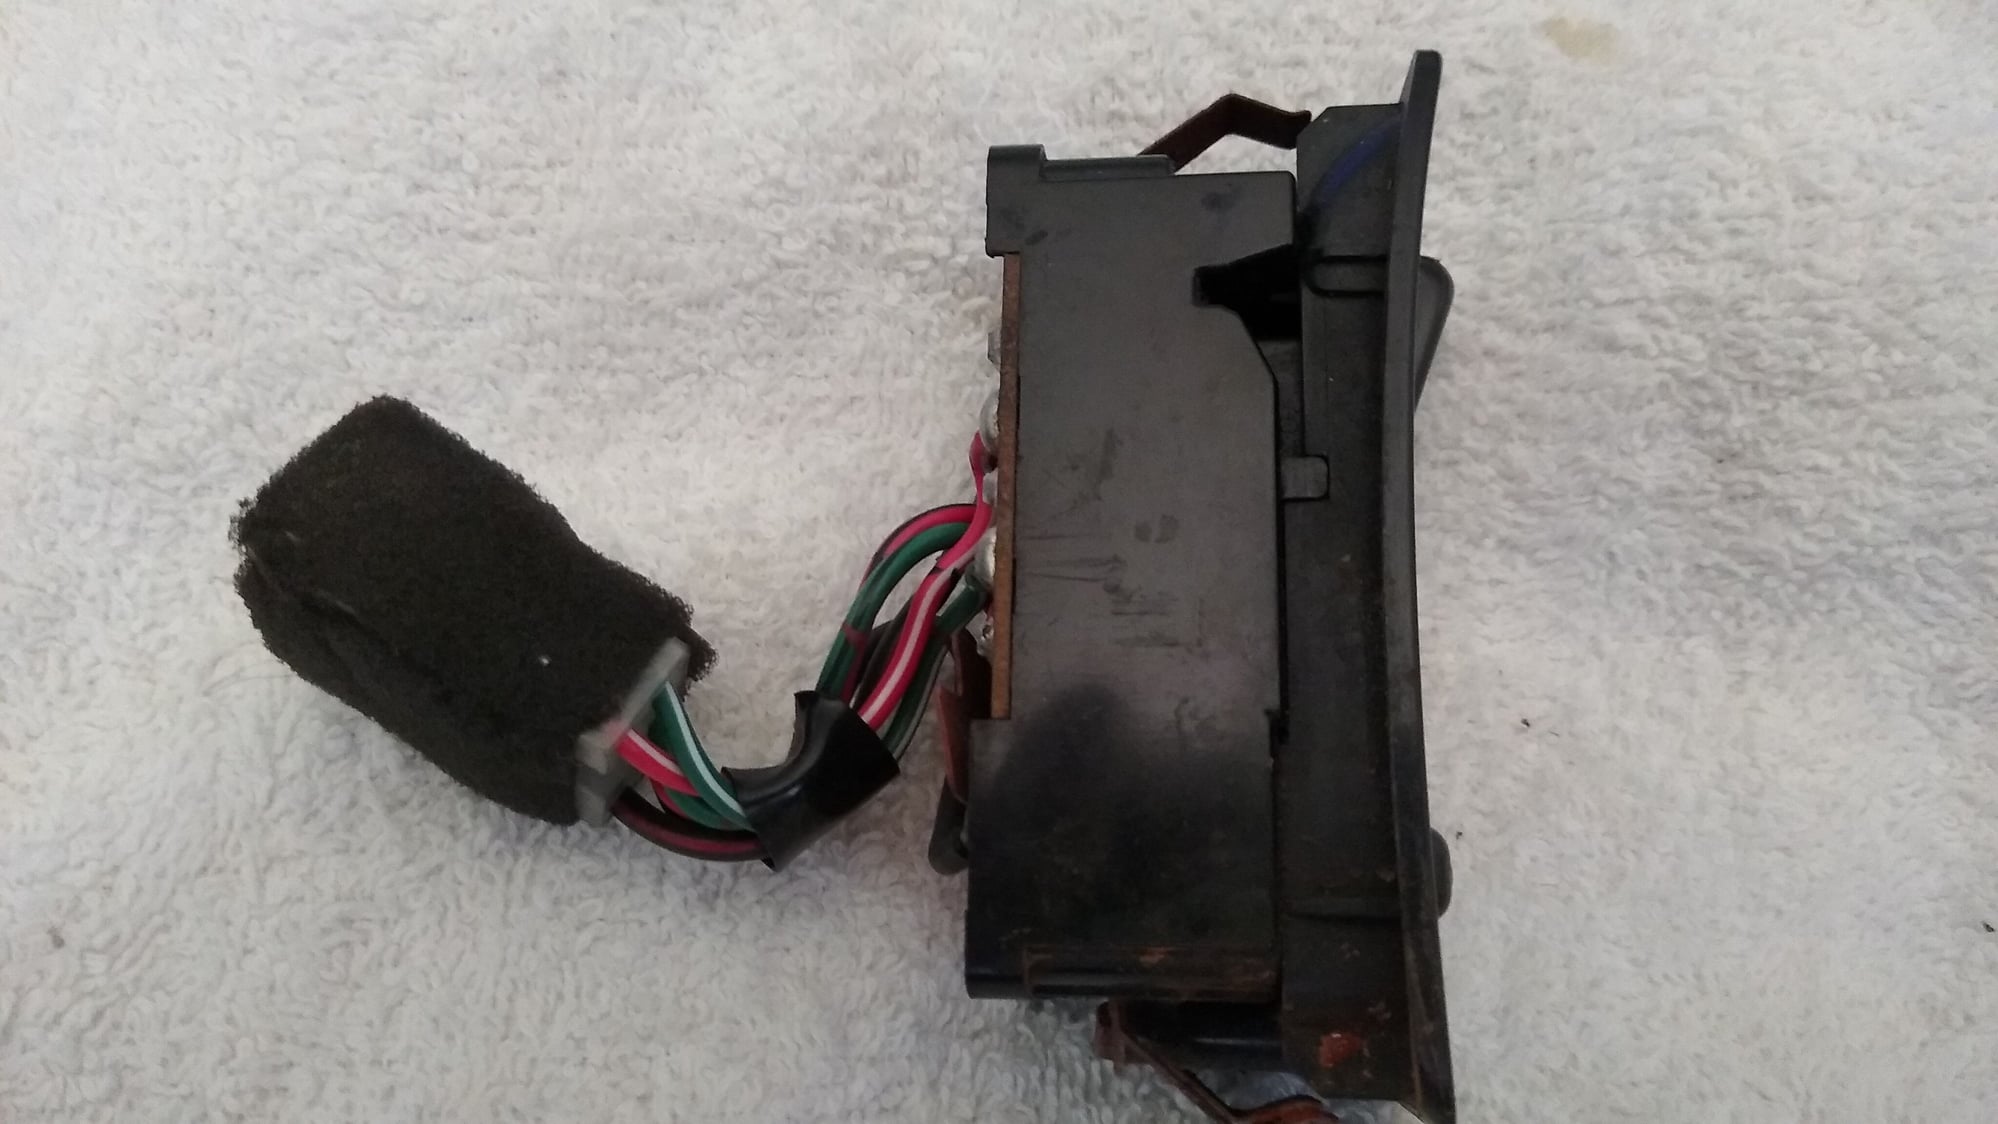 Miscellaneous - FD - OEM Driver Side Window Switch - Used - 1993 to 1995 Mazda RX-7 - San Jose, CA 95121, United States